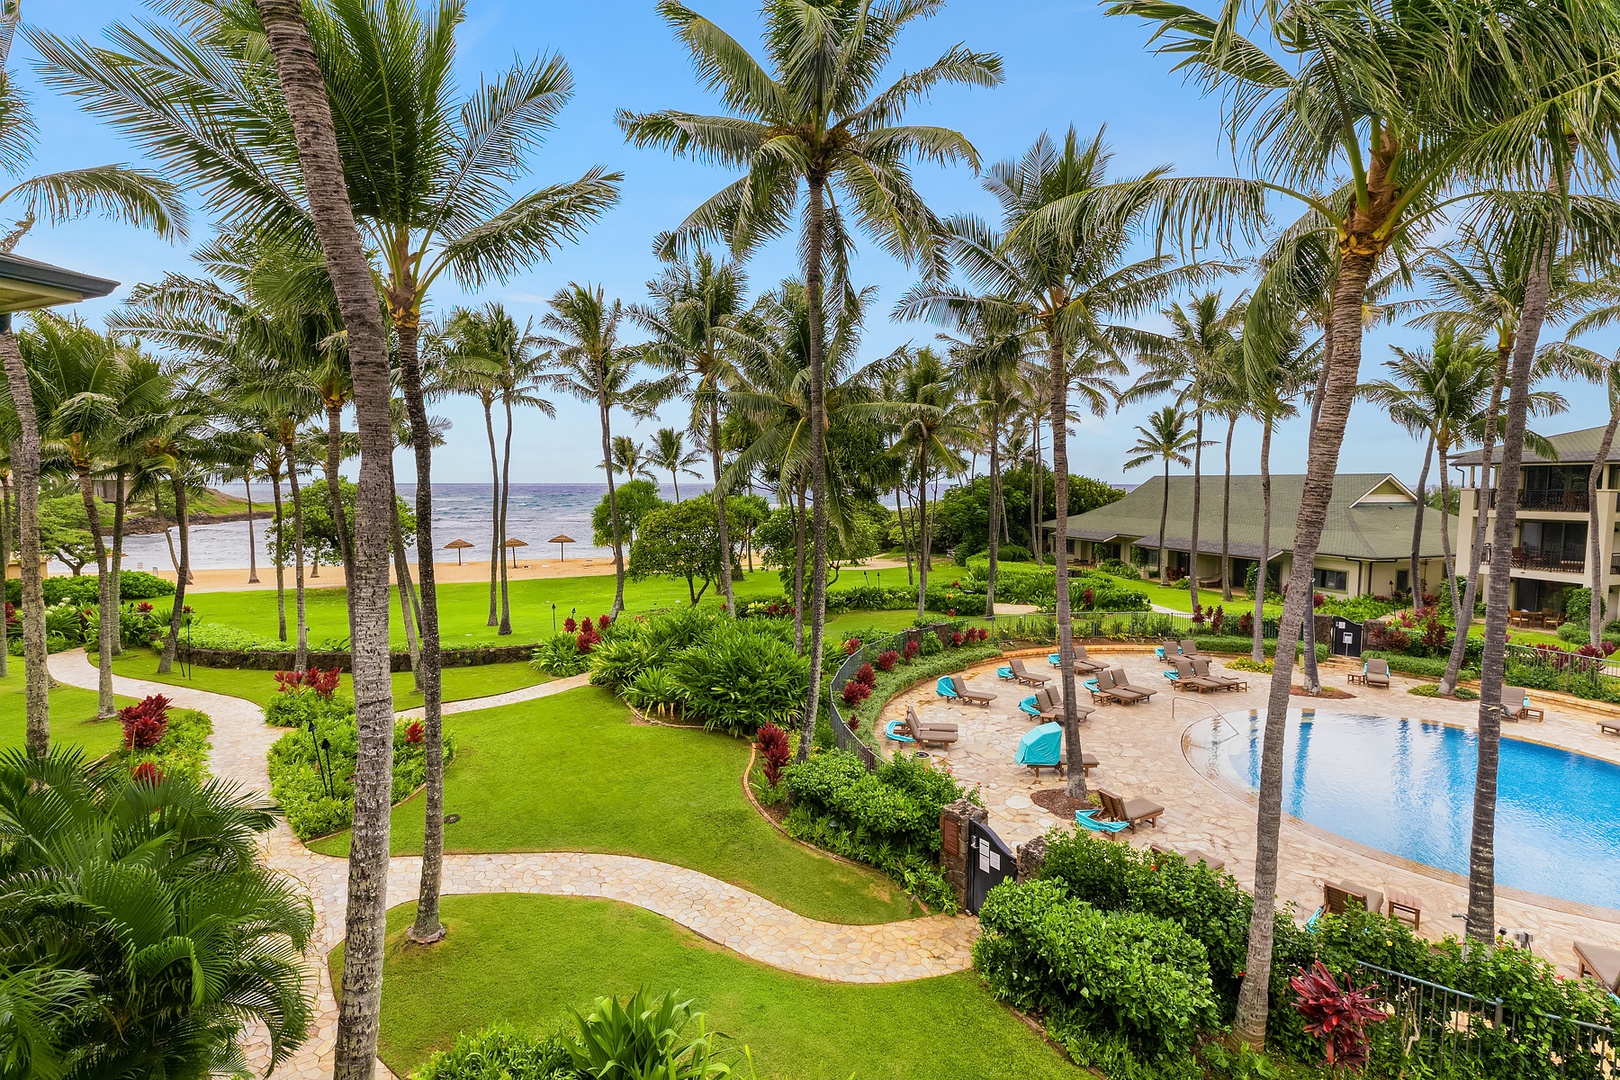 Kahuku Vacation Rentals, Turtle Bay Villas 307 - Views of the pool, beach, and ocean from the comfort of your lanai